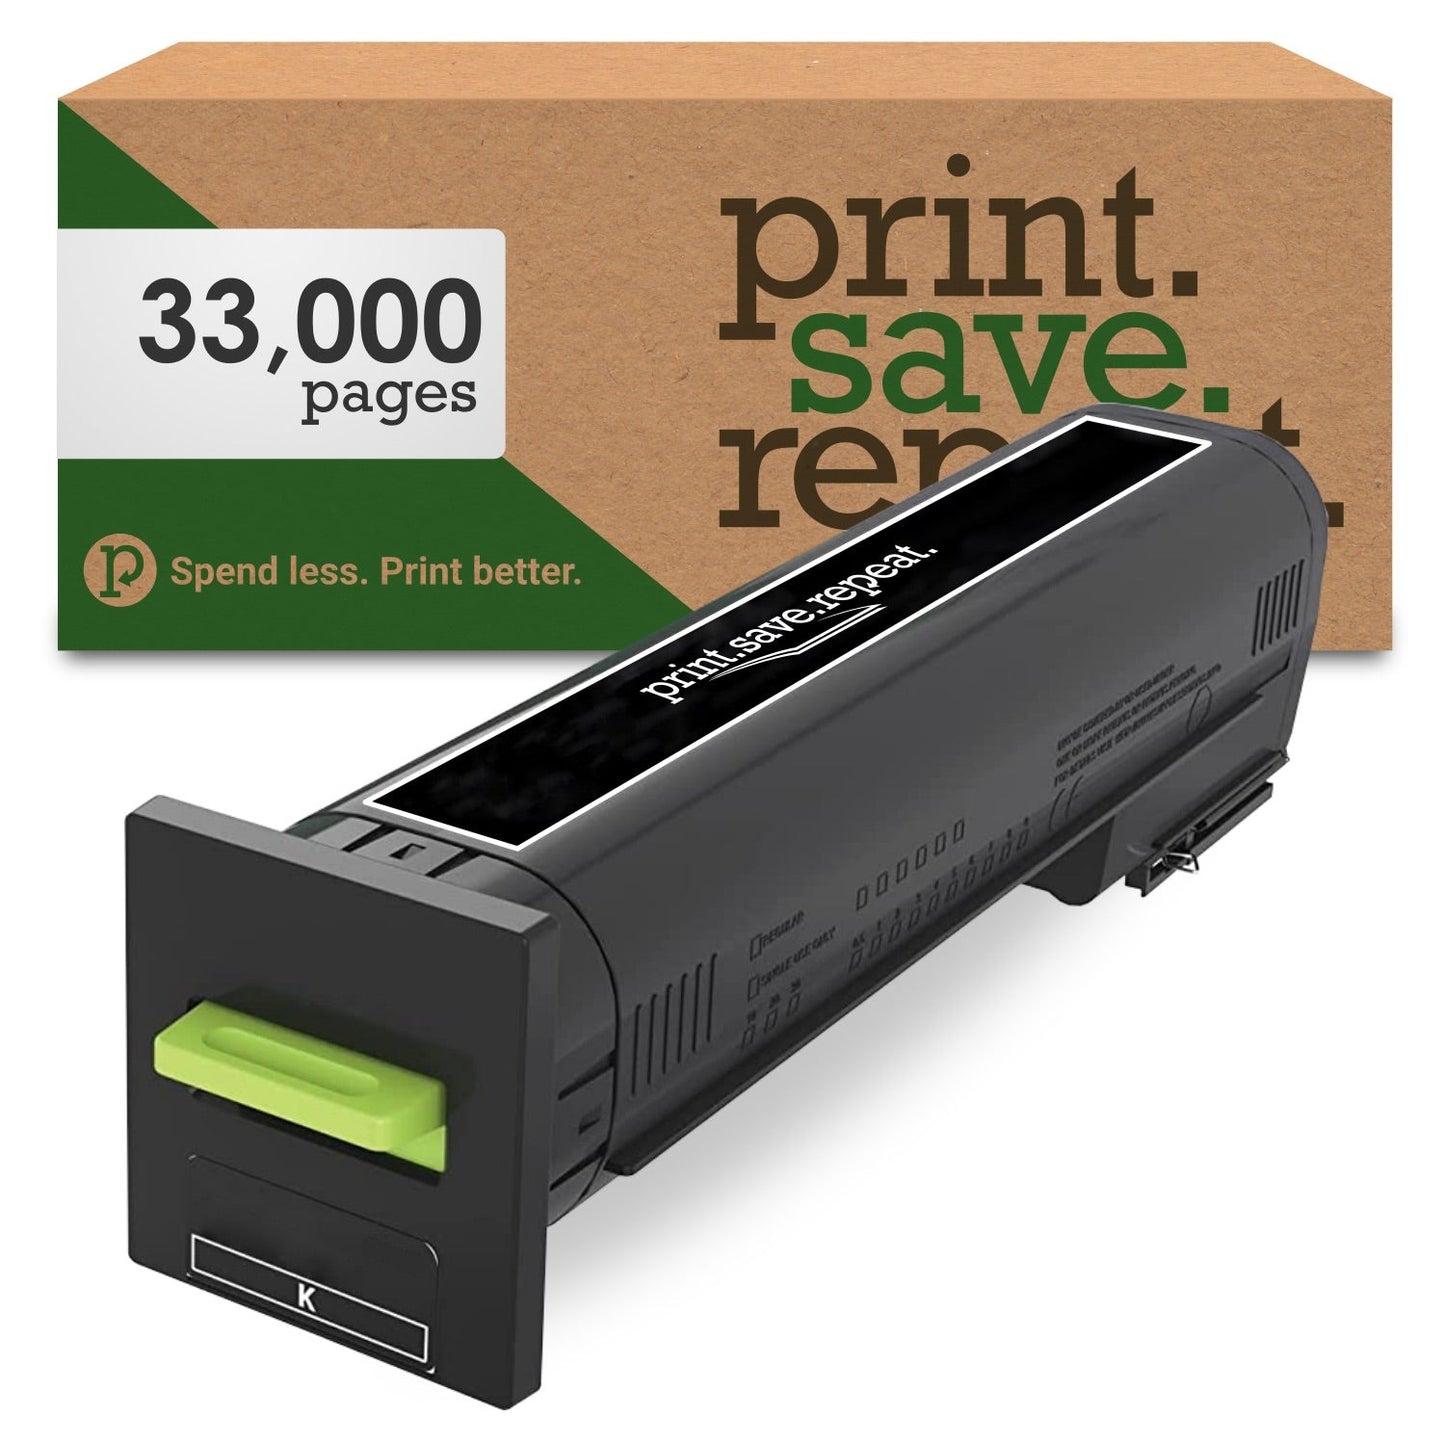 Print.Save.Repeat. Lexmark 72K1XK0 Black Extra High Yield Remanufactured Toner Cartridge for CS820, CX820, CX825, CX860 [33,000 Pages]